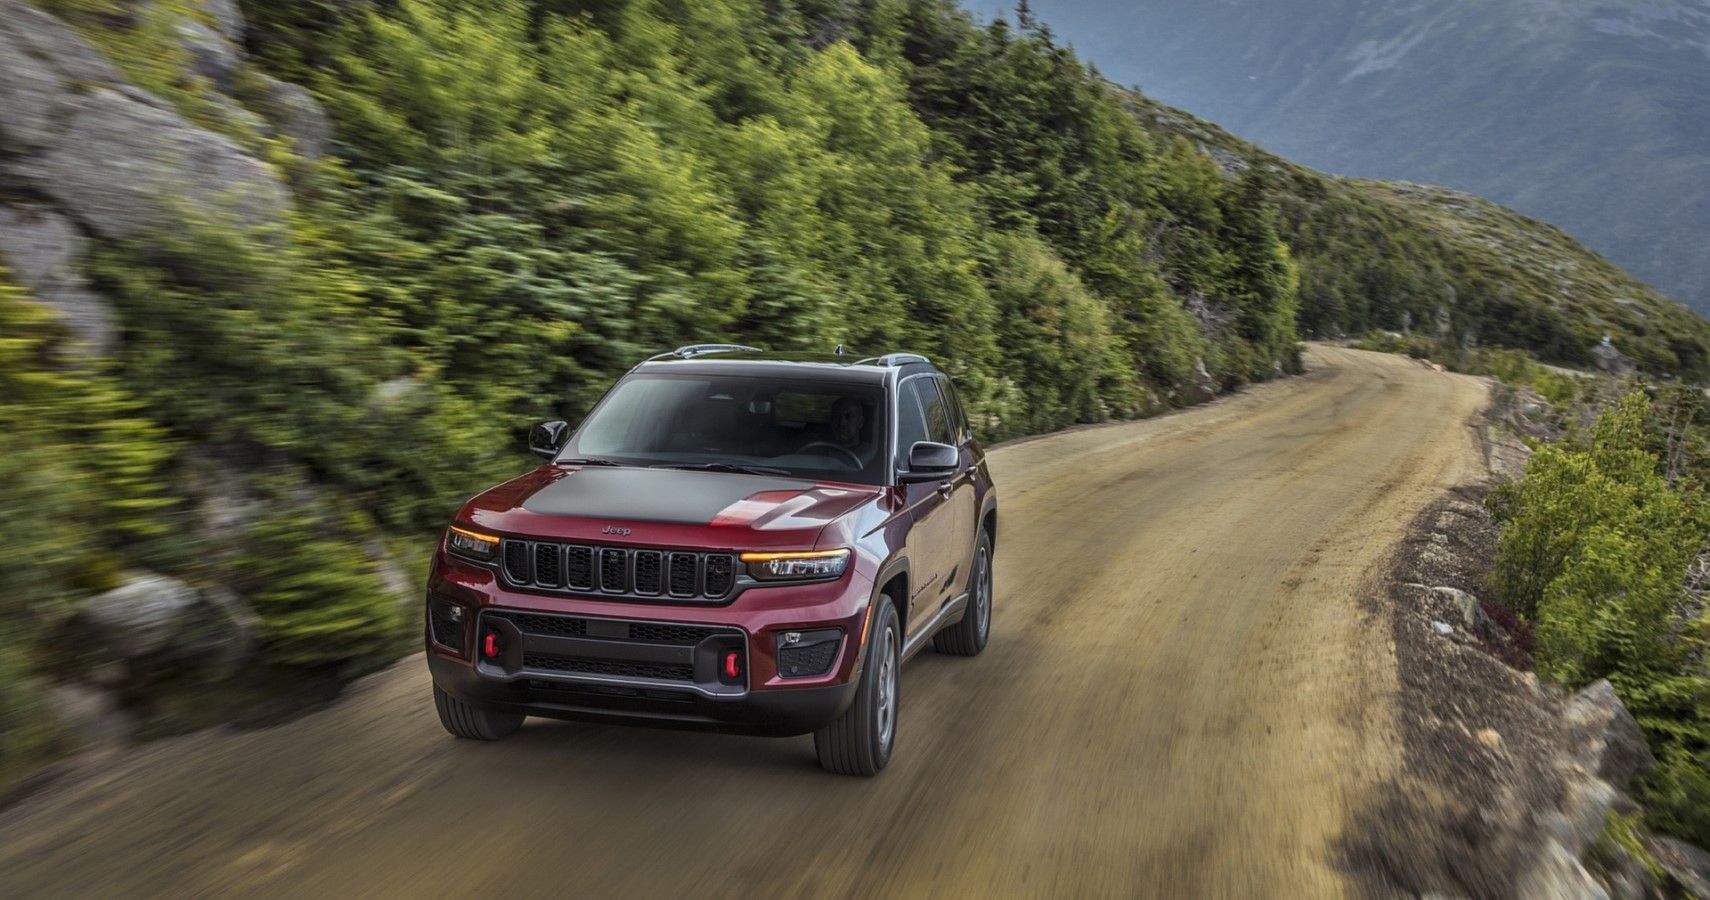 2022 Jeep Grand Cherokee Trailhawk accelerating on the trail